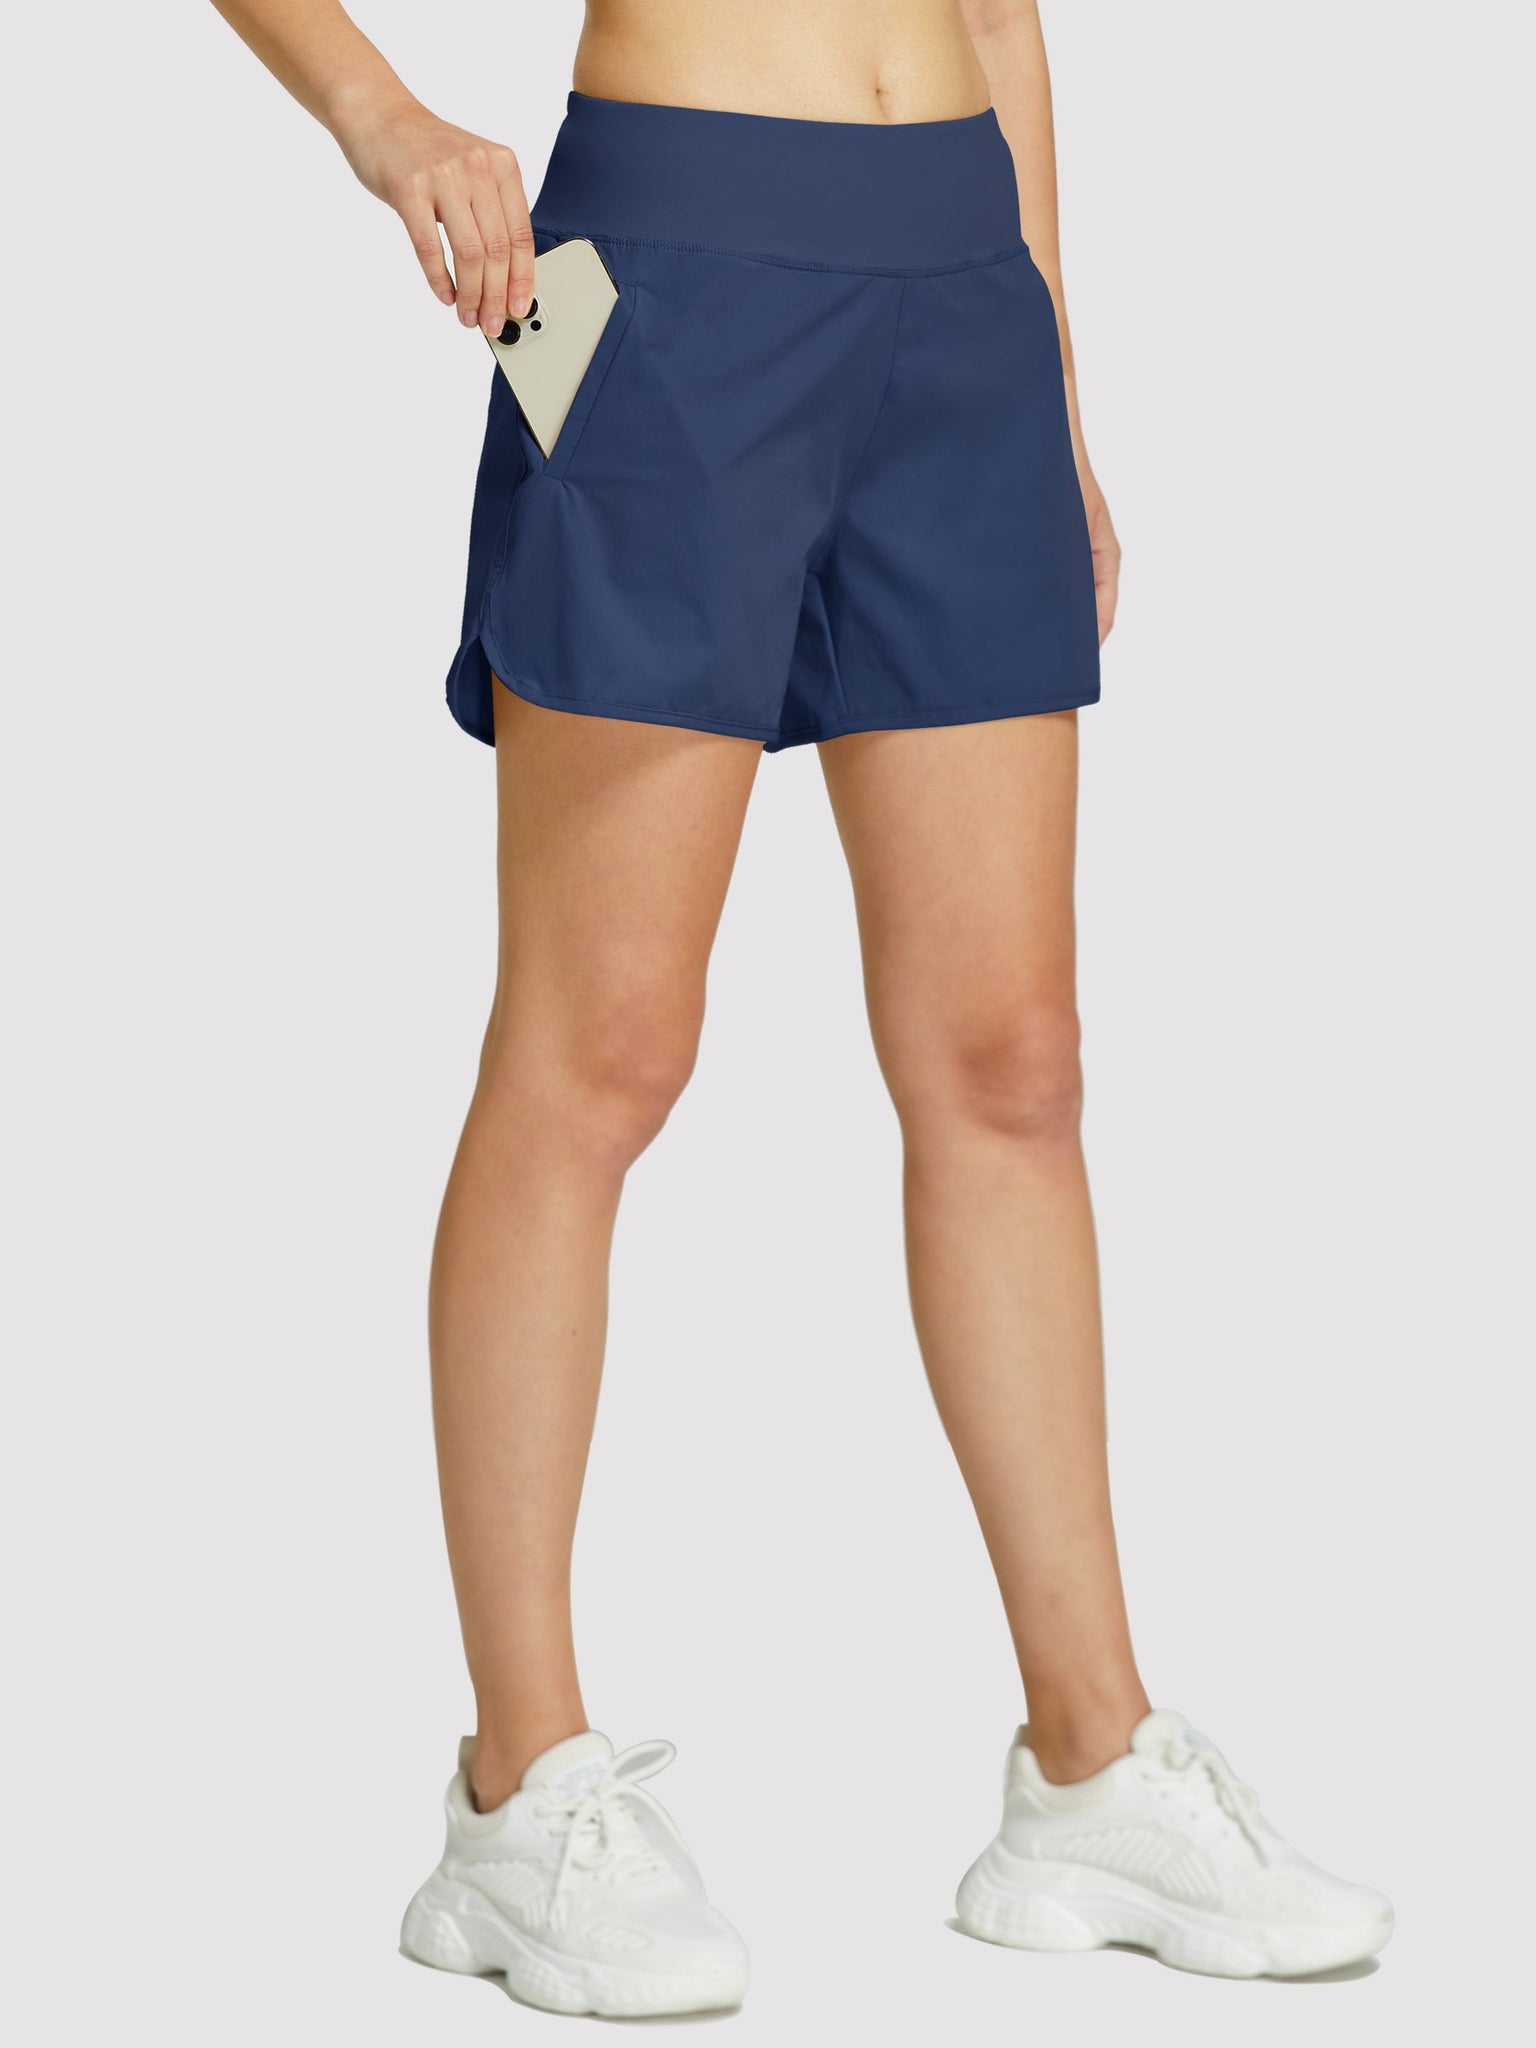 Womens High Rise Running Athletic Shorts_Navy2